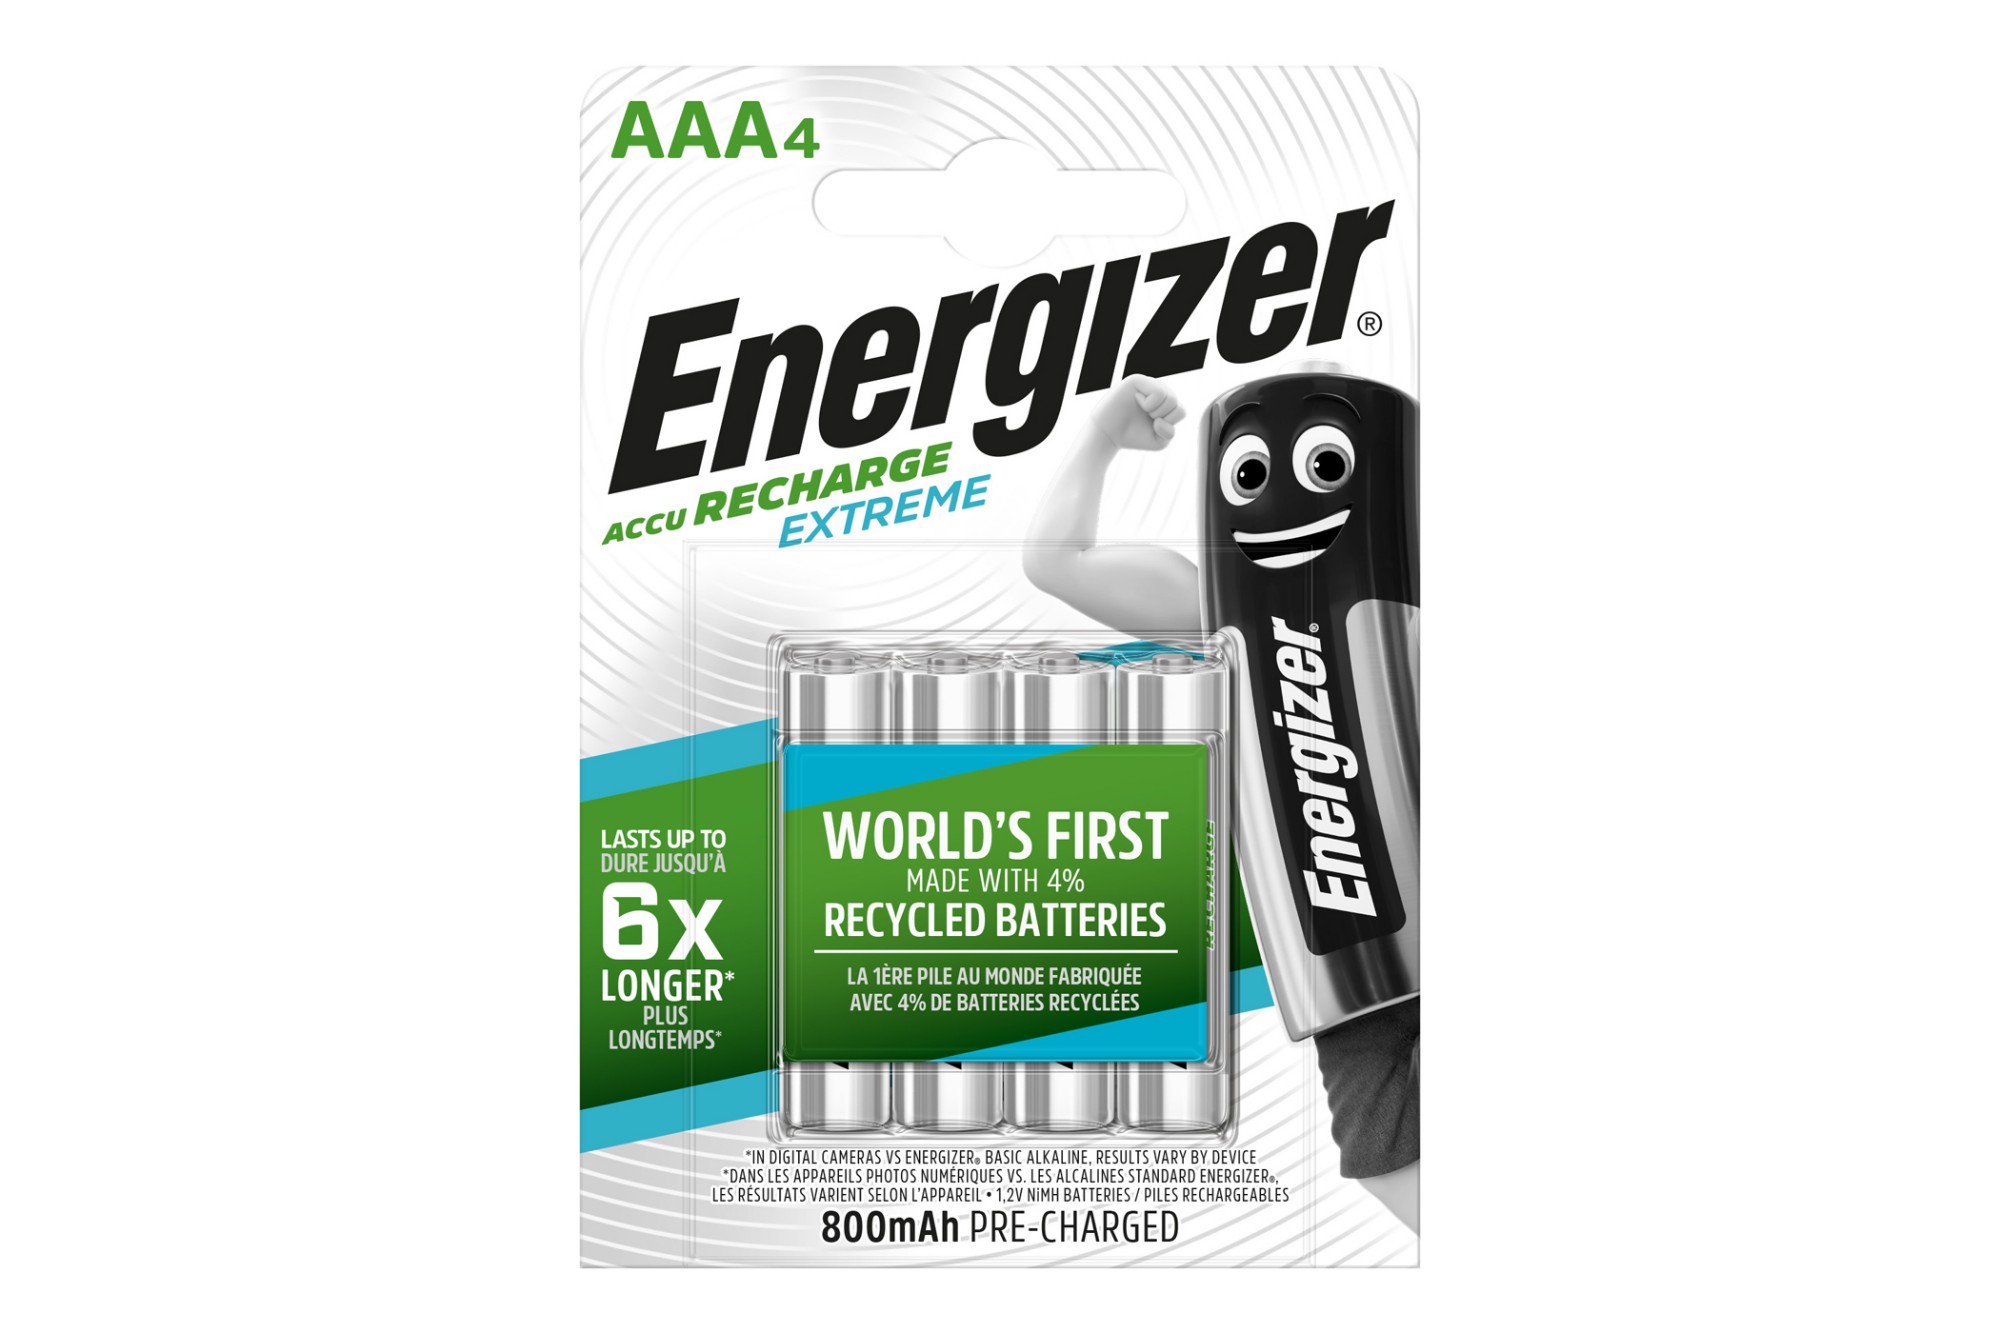 E300849400 ENERGIZER Extreme Rechargeable 800mAh Ni-MH AAA Batteries - Pack of 4